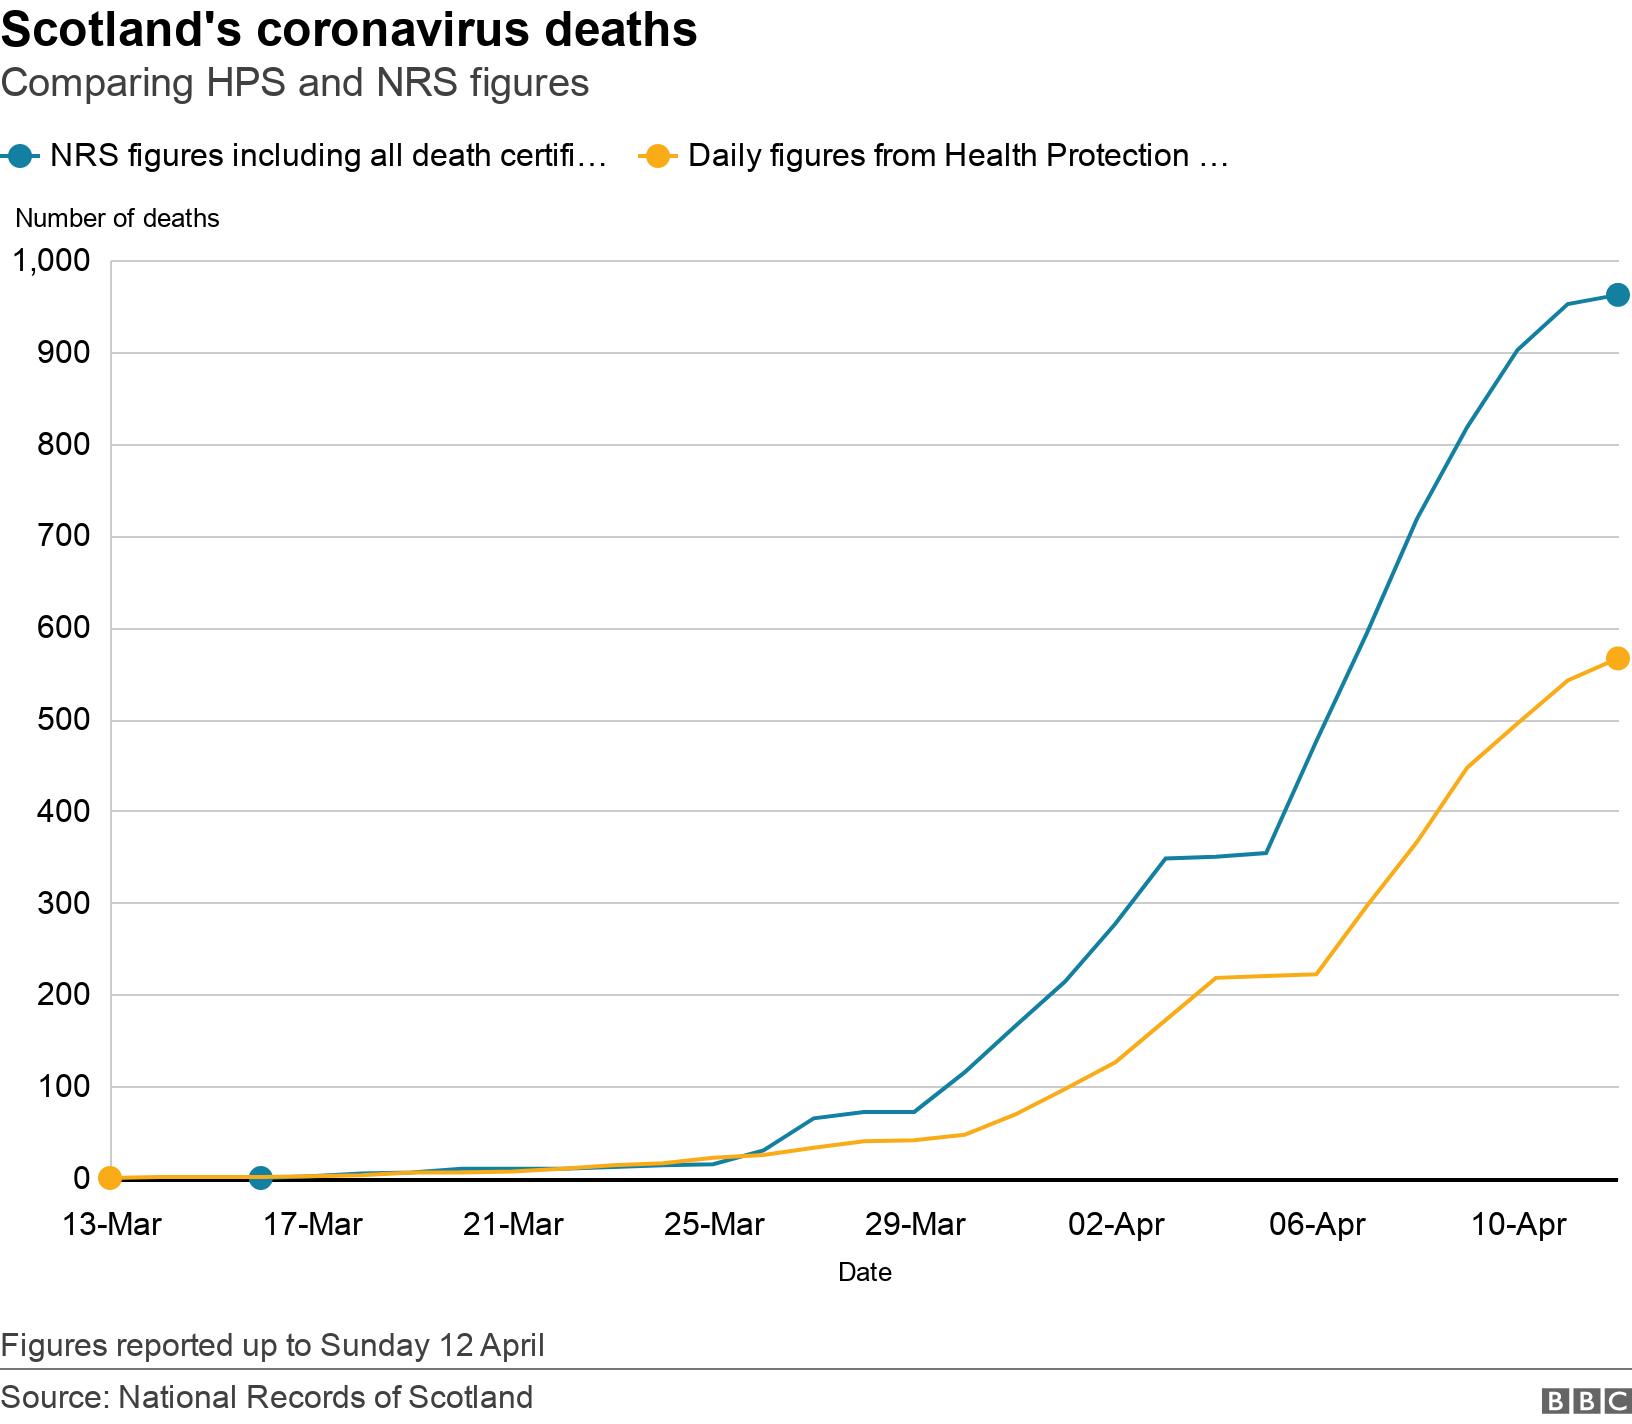 Scotland's coronavirus deaths. Comparing HPS and NRS figures.  Figures reported up to Sunday 12 April.